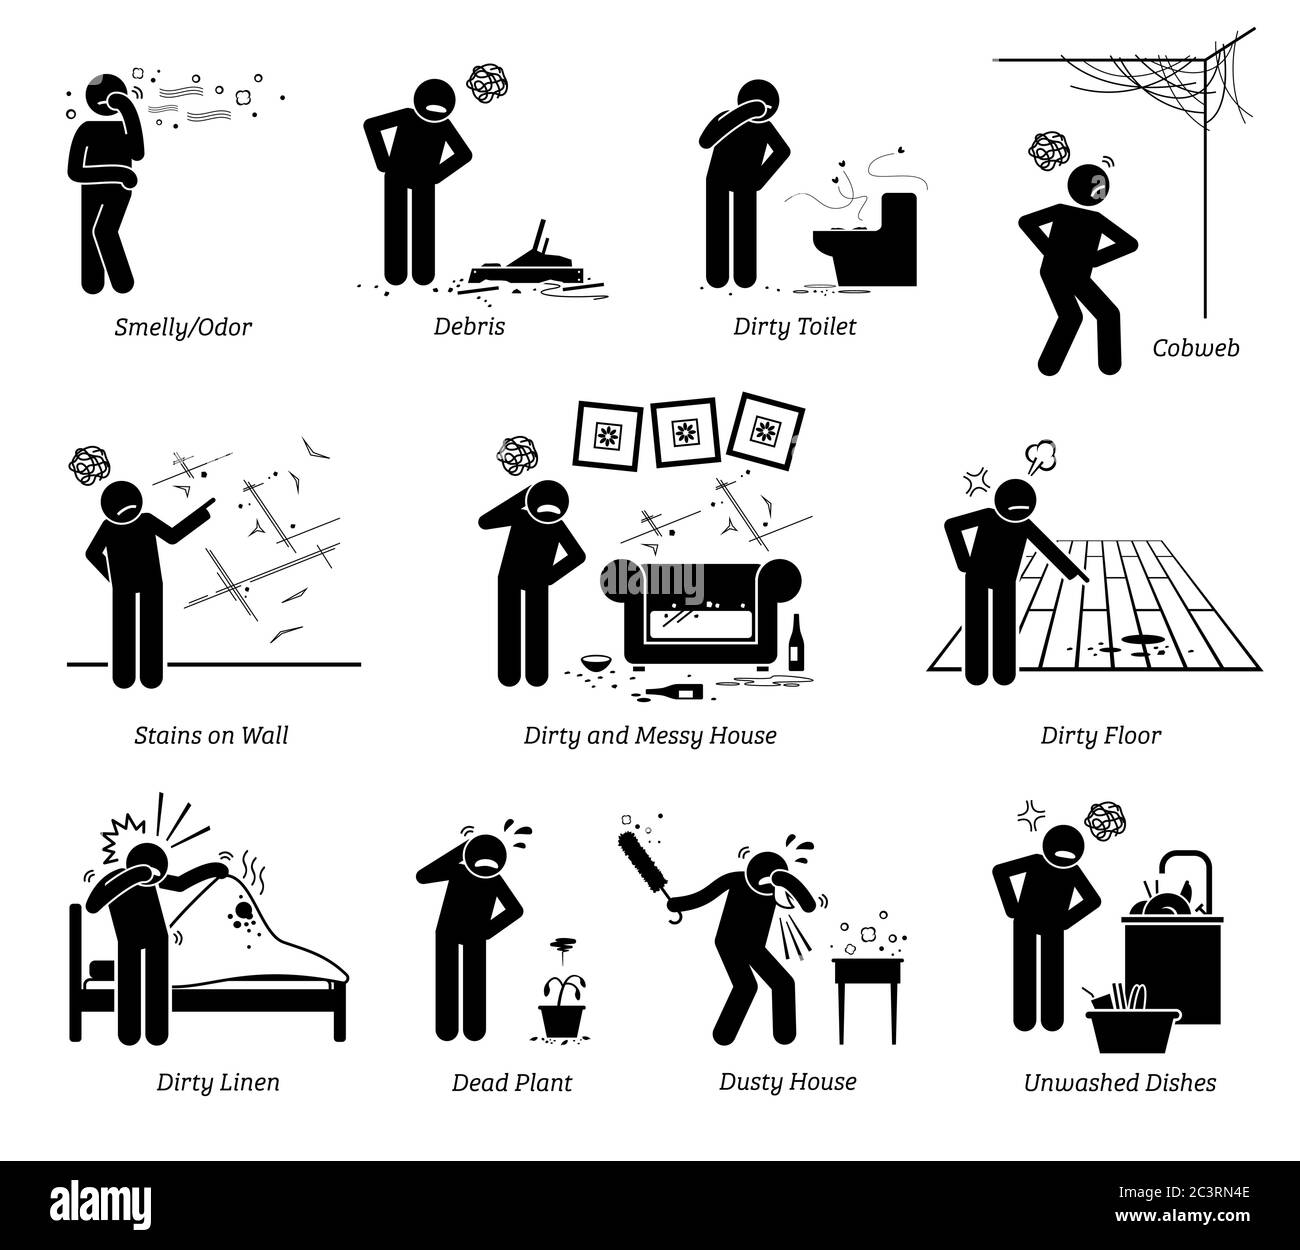 Dirty and messy house stick figure pictogram icons. Vector illustration of a person complaining about a poorly maintained house that is old, dirty, an Stock Vector